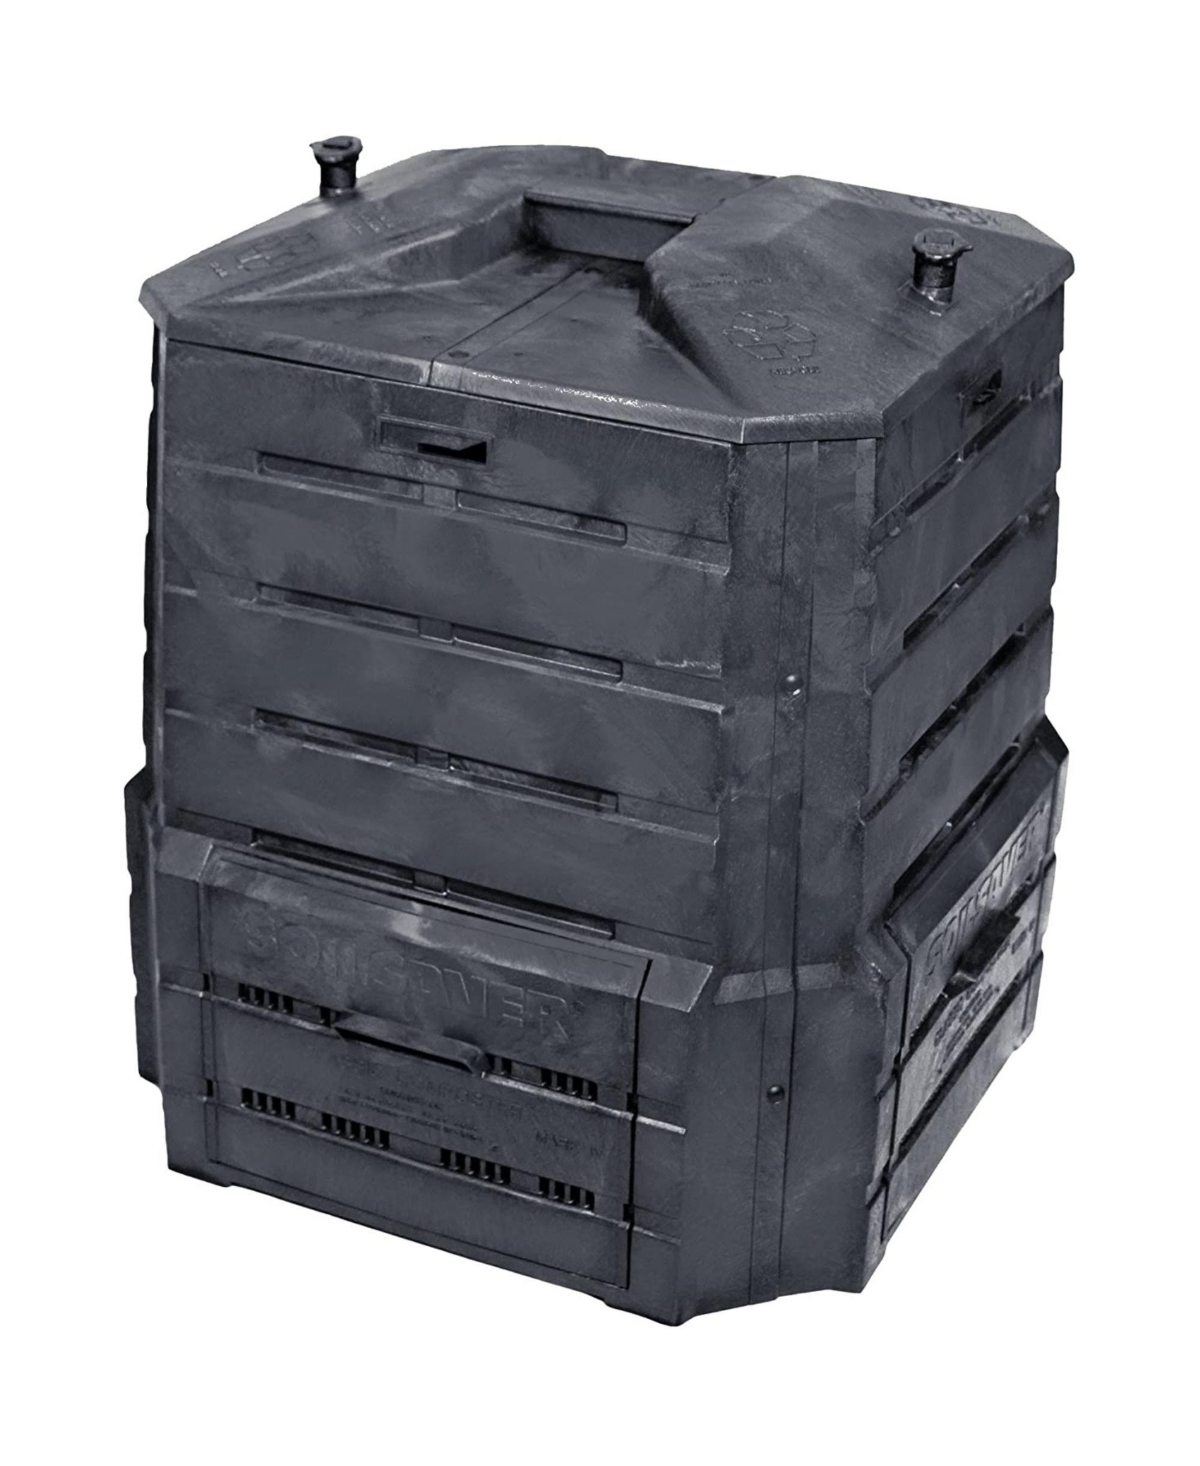 Products Soil Saver Classic Compost Bin, Black, 94 Gallons - Other